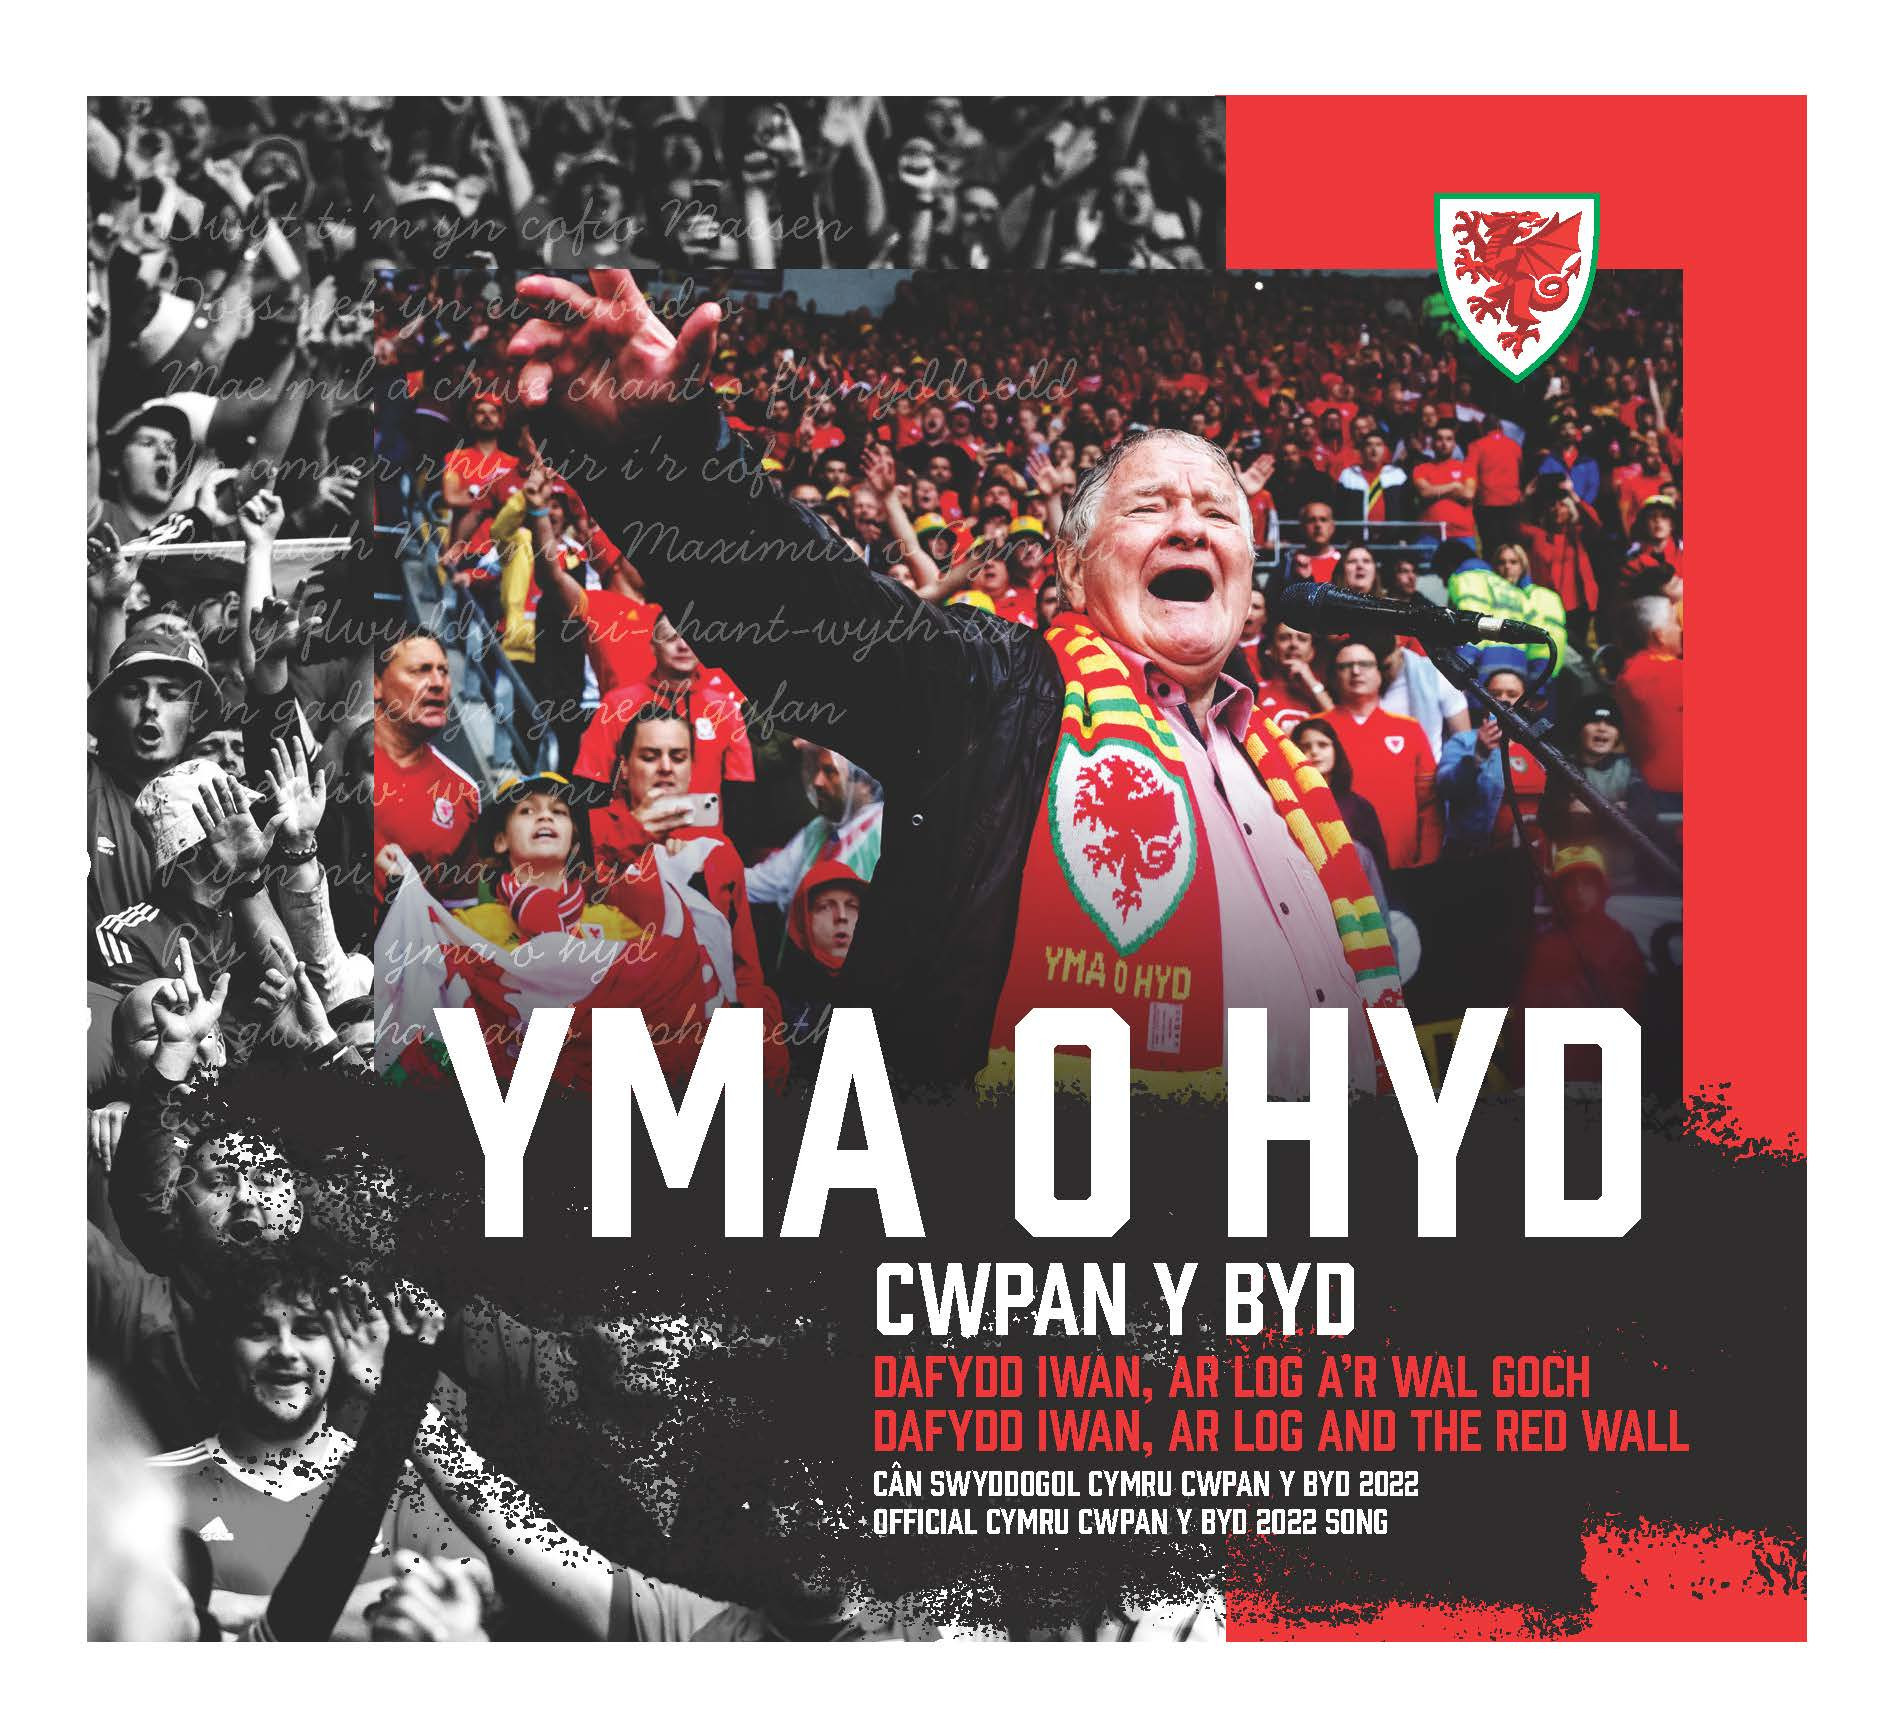 Welsh World Cup anthem Yma o Hyd featuring players and "Red Wall"